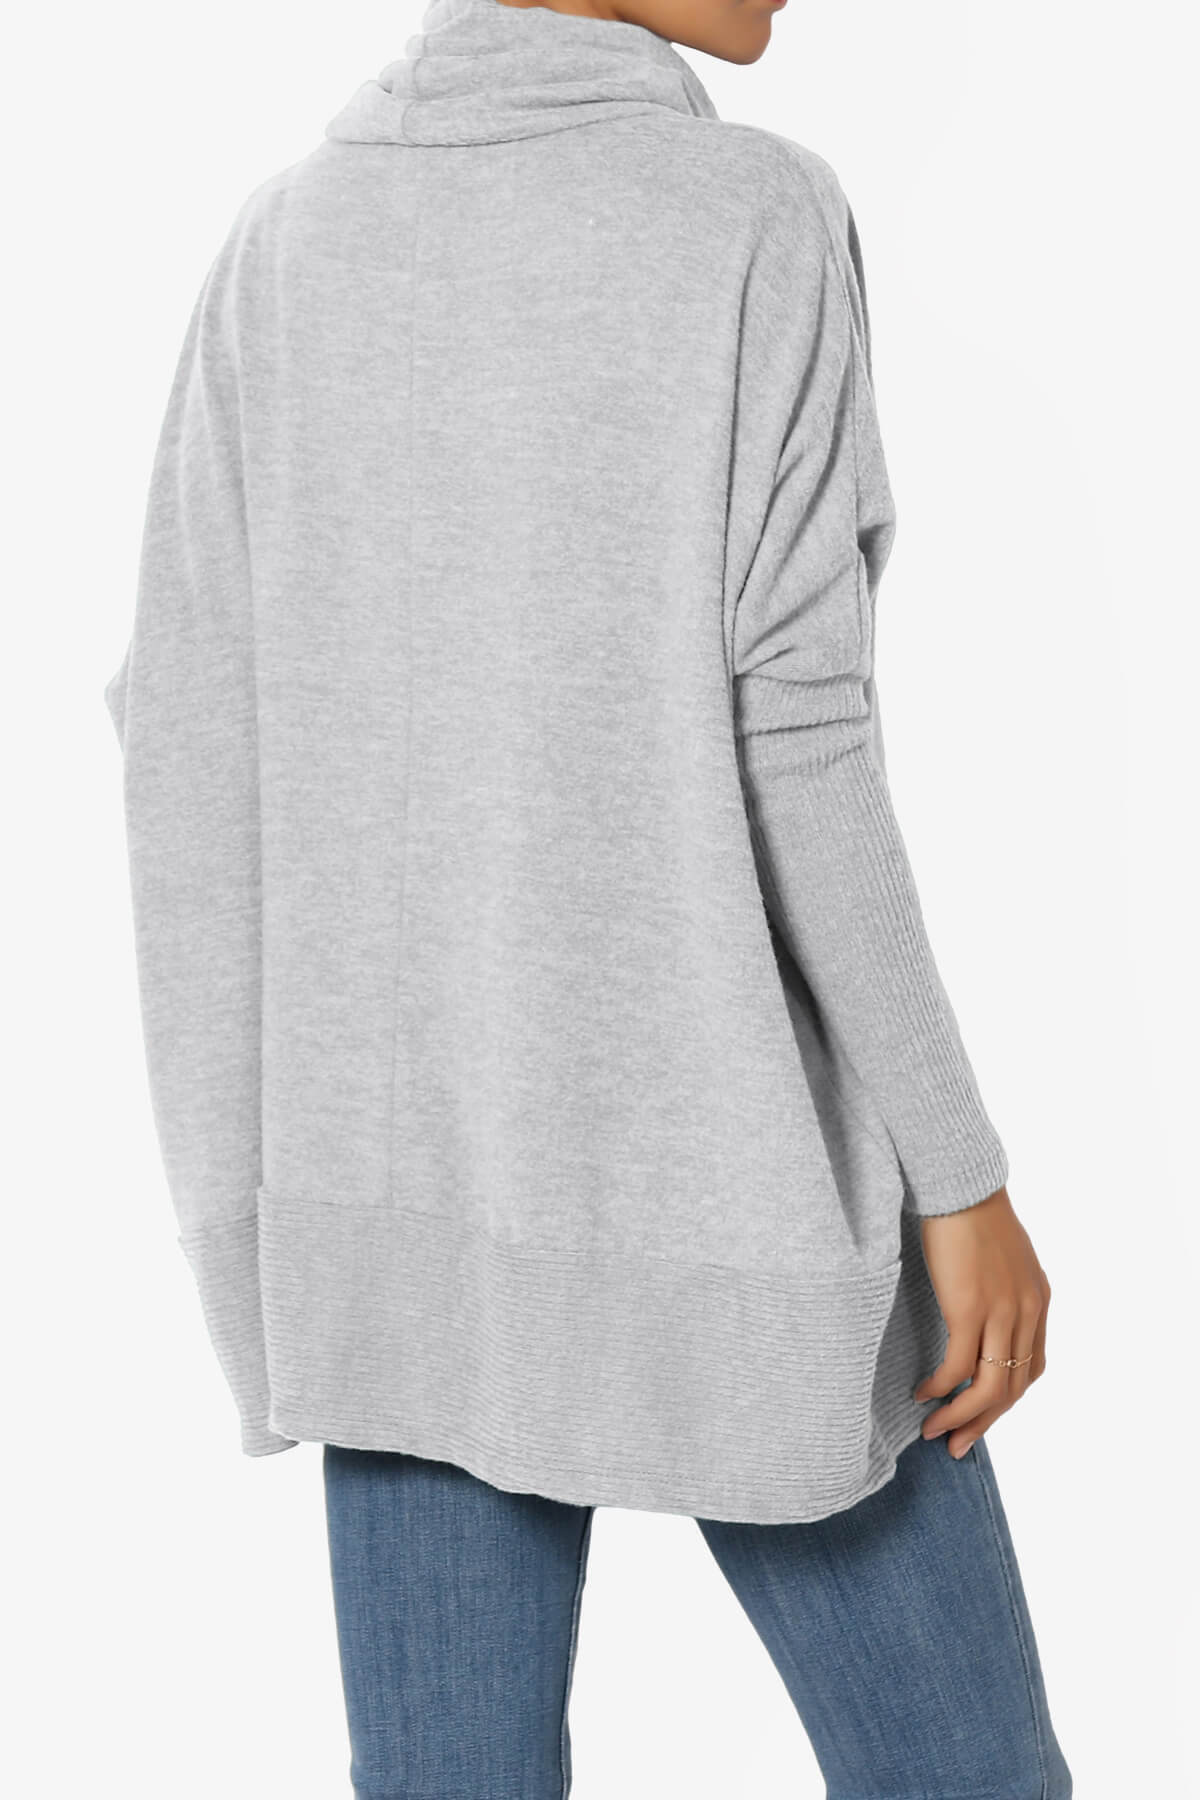 Load image into Gallery viewer, Barclay Cowl Neck Melange Knit Oversized Sweater HEATHER GREY_4
